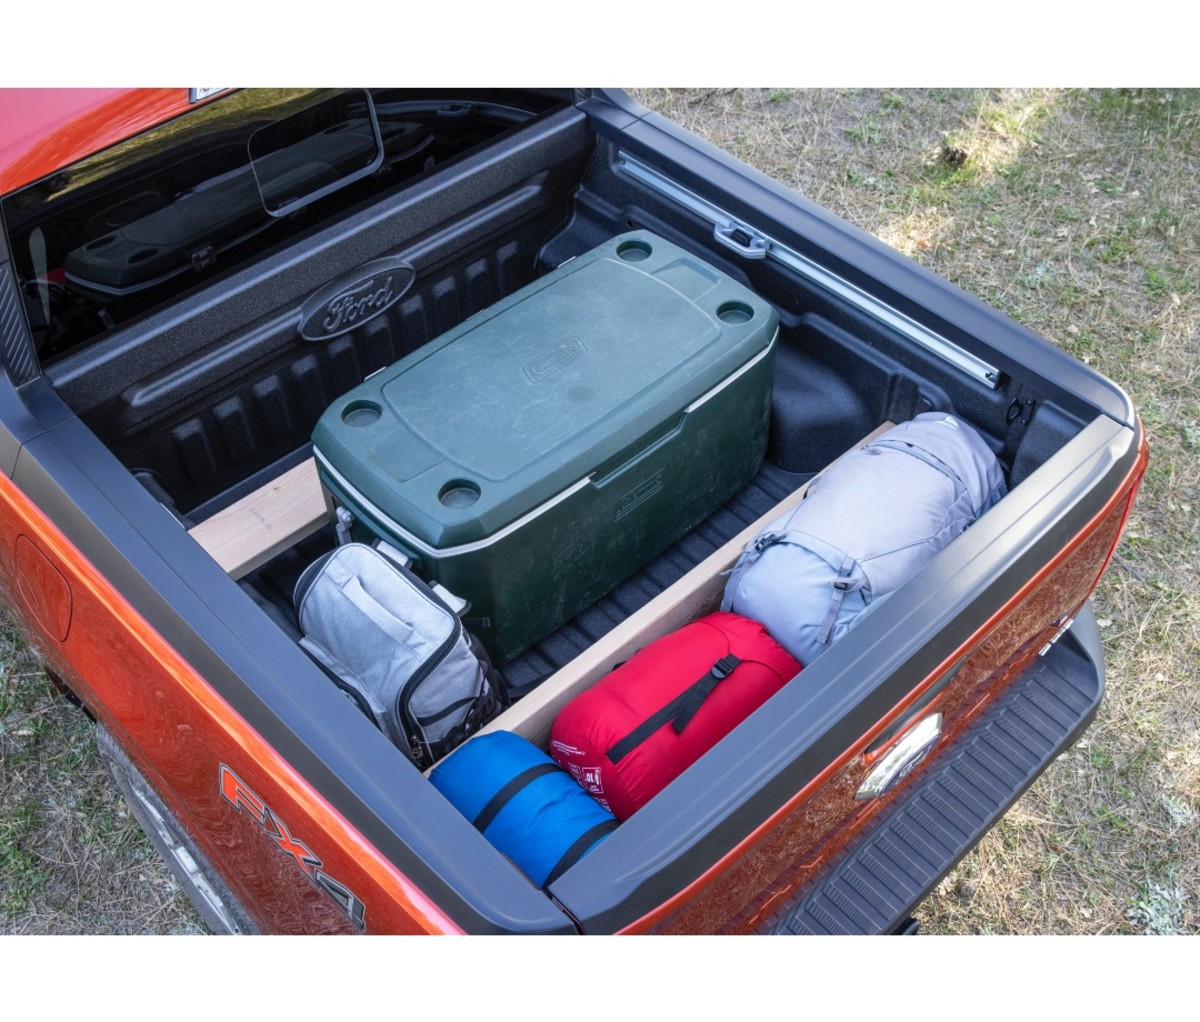 The new Ford Maverick can haul a lot of gear in the small bed.